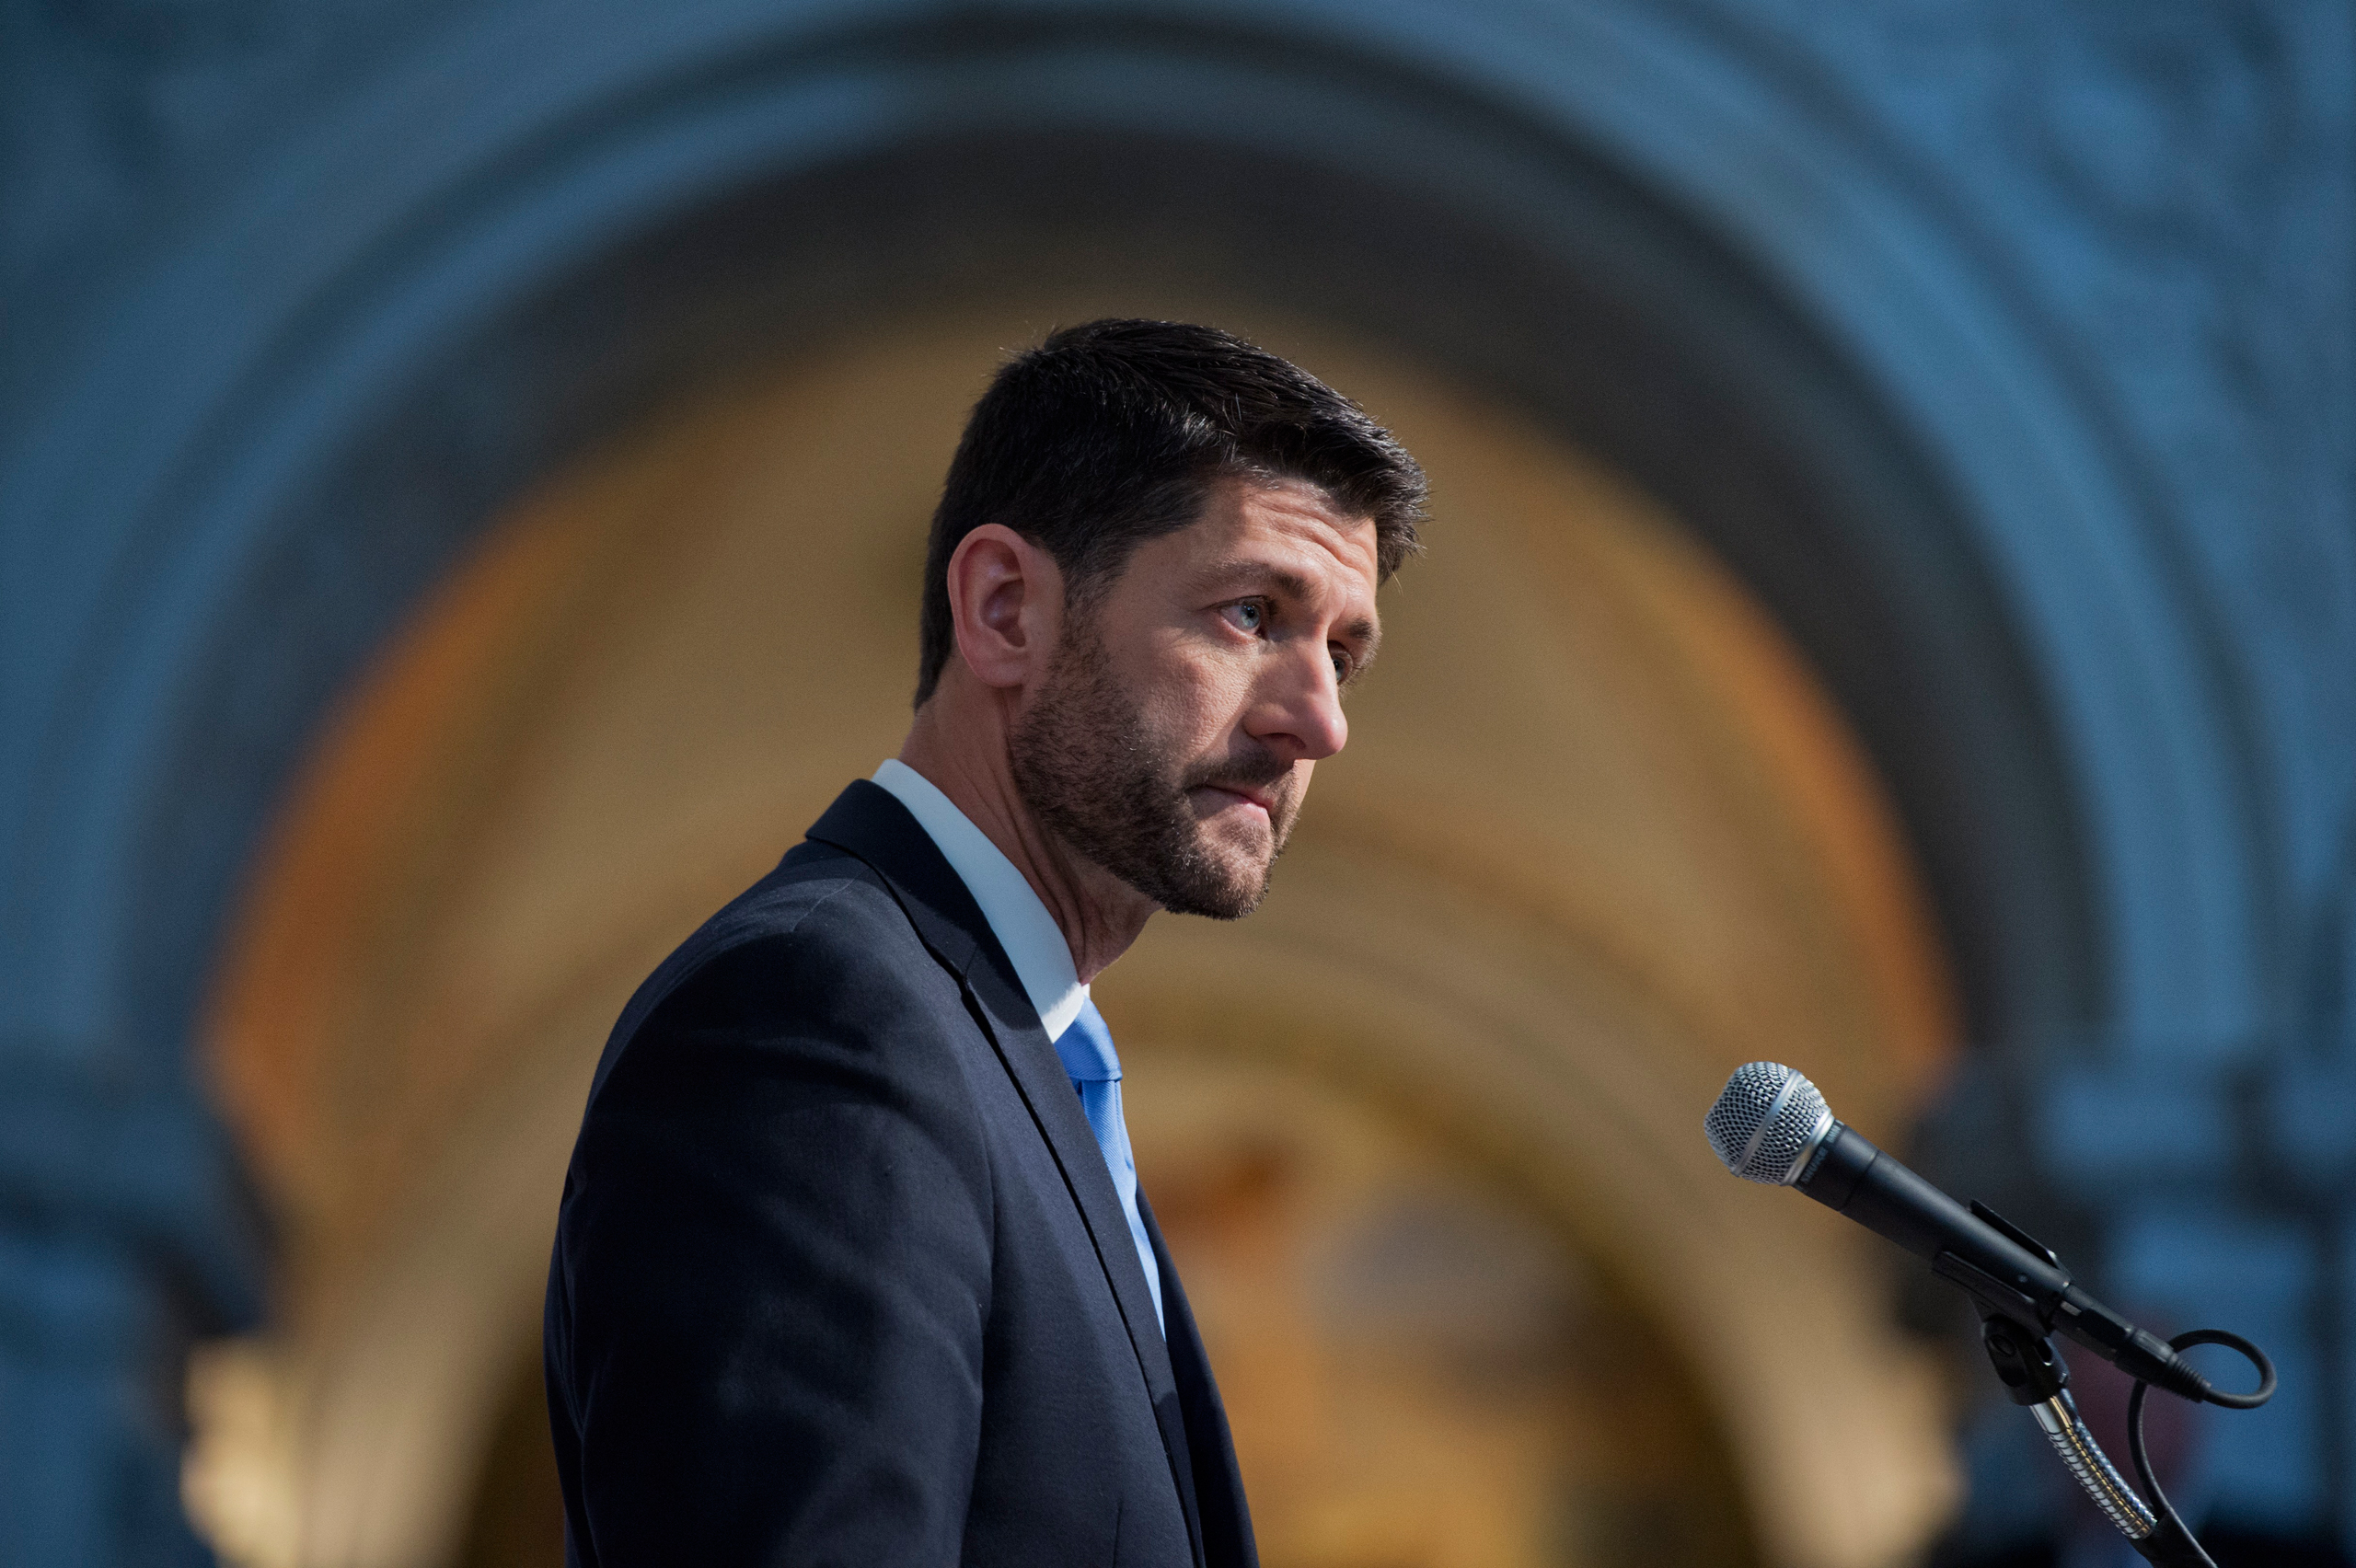 Ryan, at the Library of Congress in December, discusses the country's challenges how to address them (Tom Williams—CQ Roll Call/Getty Images)